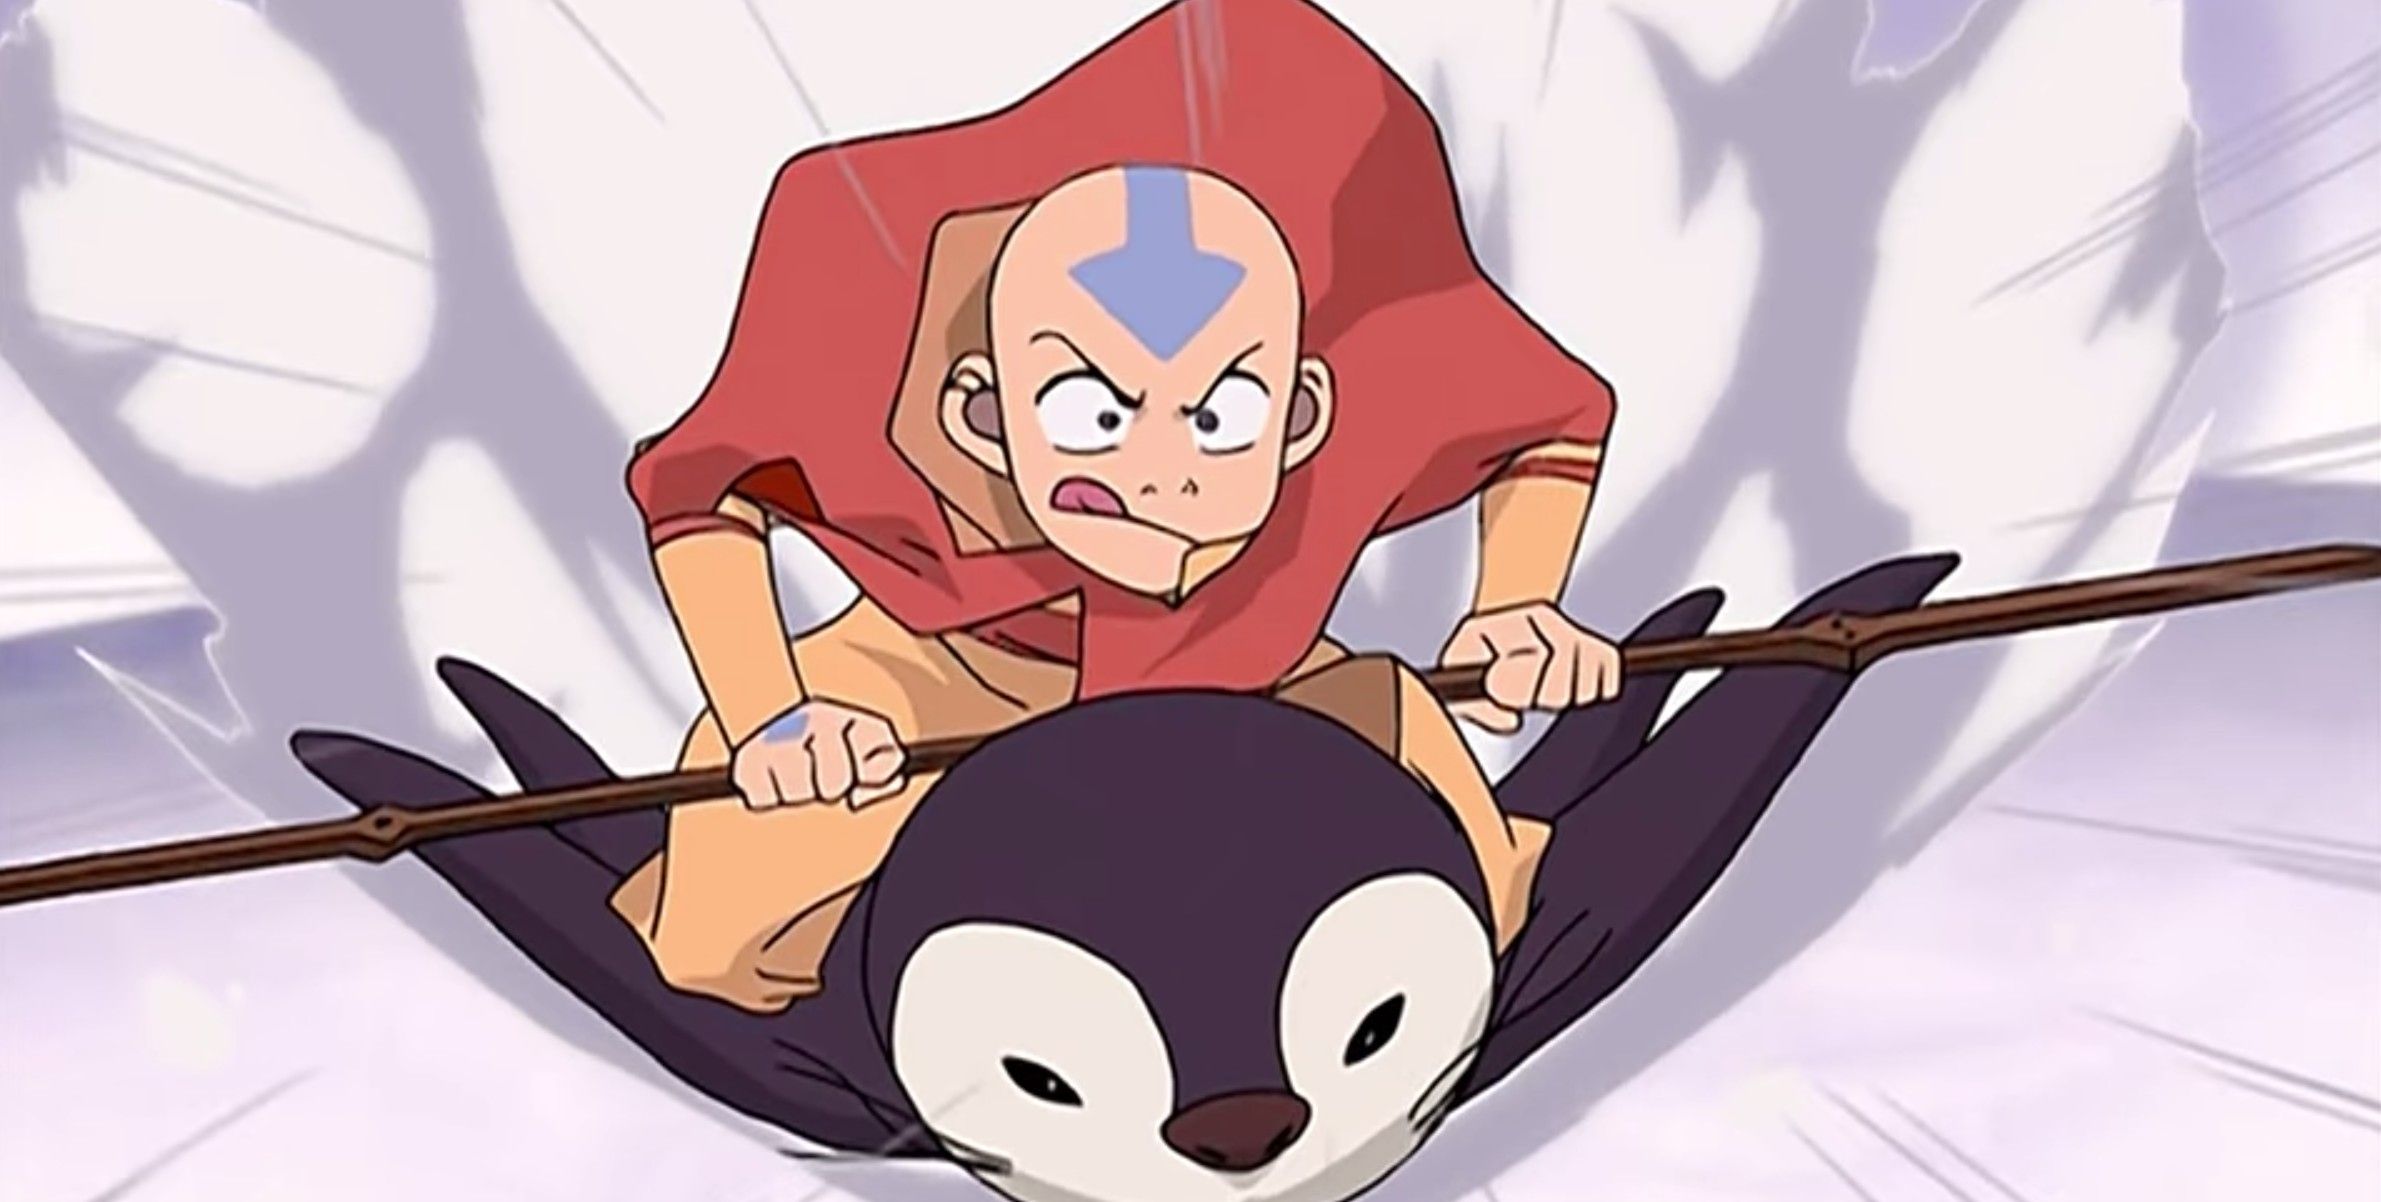 Aang Penguin Sleds in Avatar The Last Airbender 1